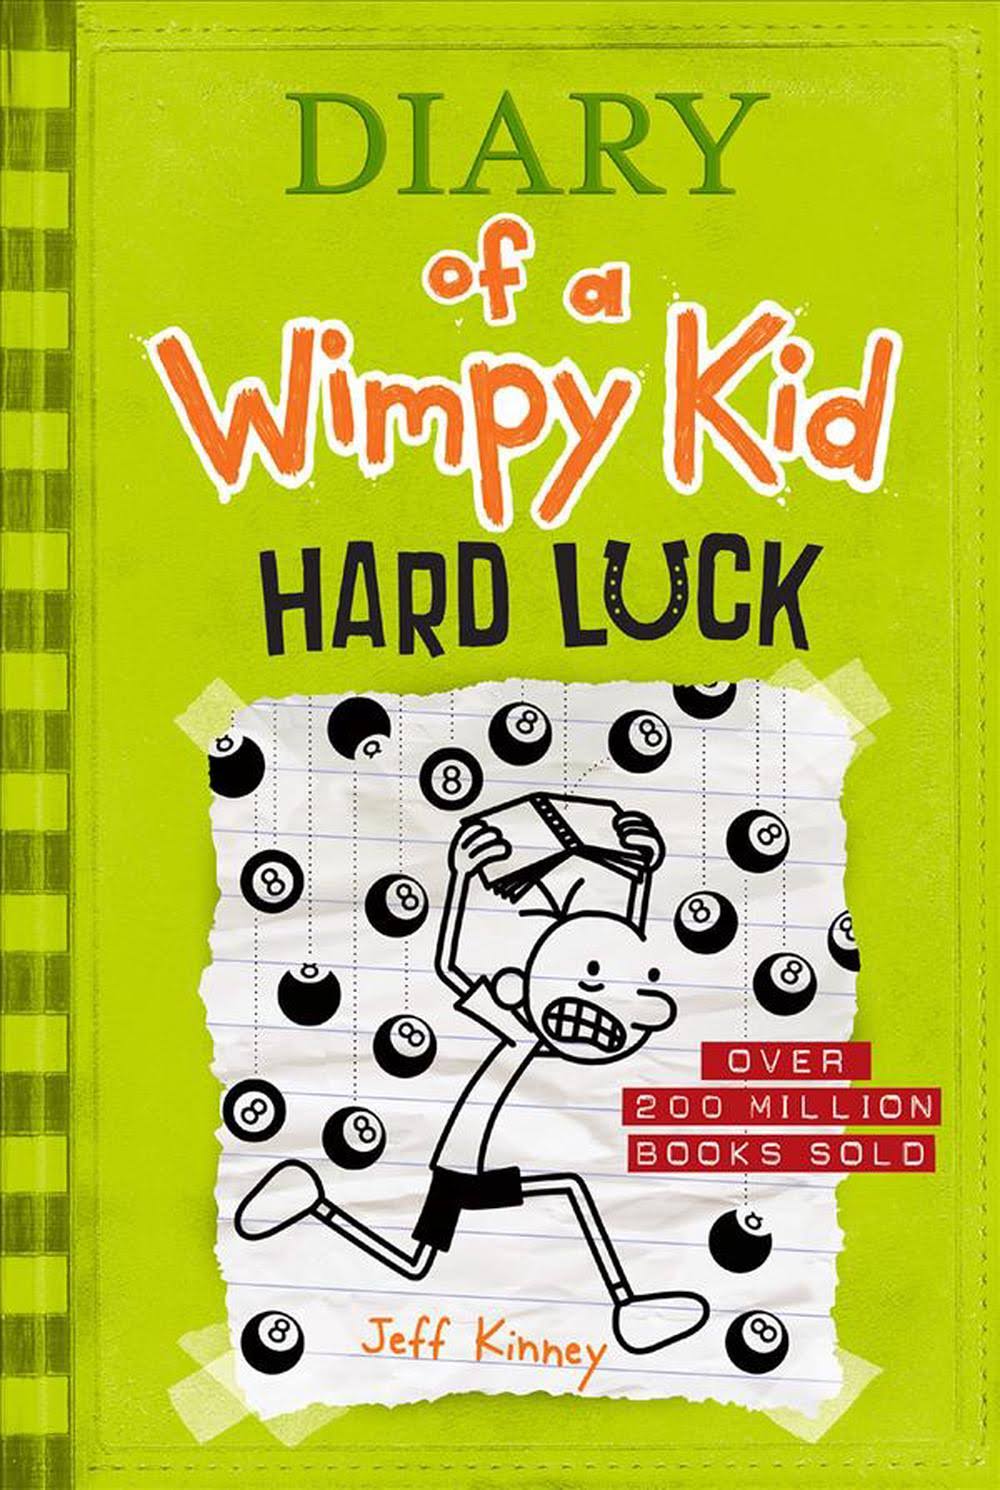 Hard Luck (Diary of a Wimpy Kid #8) [Book]